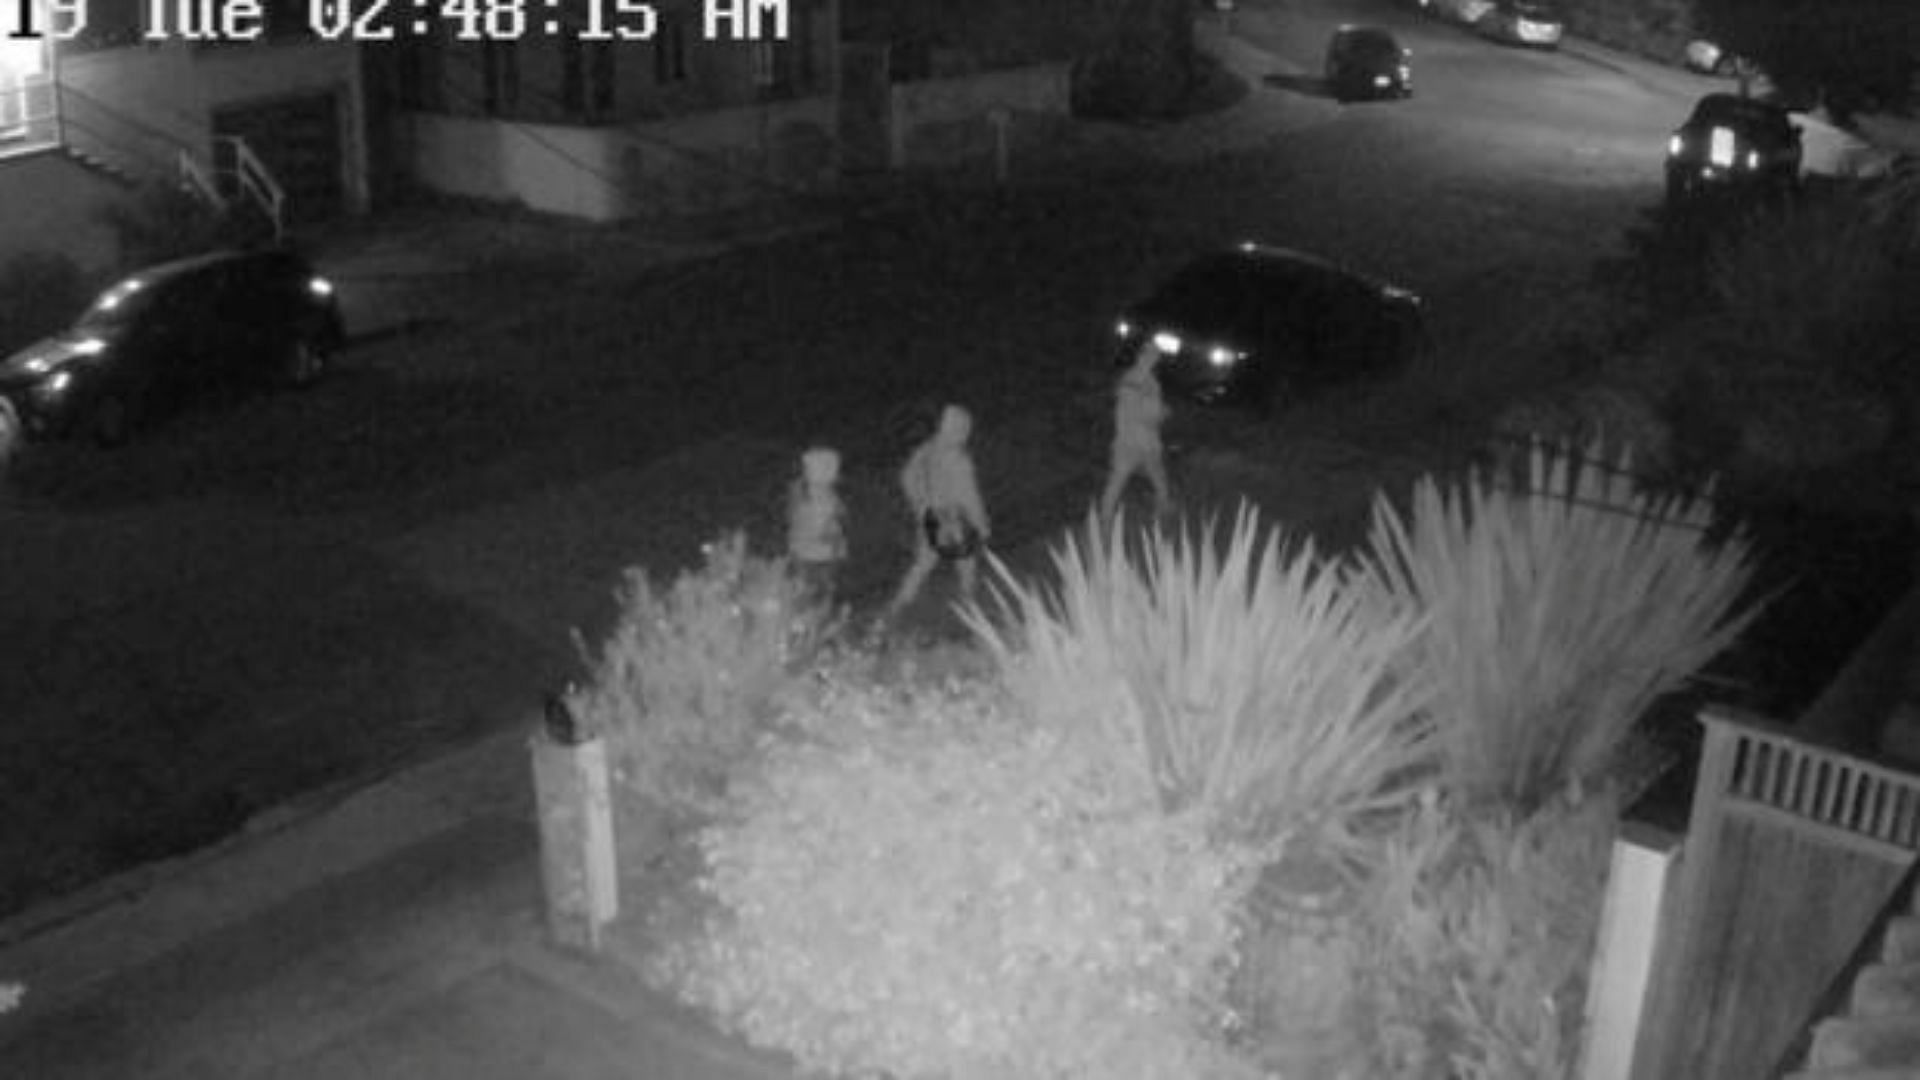 A still from the surveillance footage that was recovered by the police (Image Via CBS News)